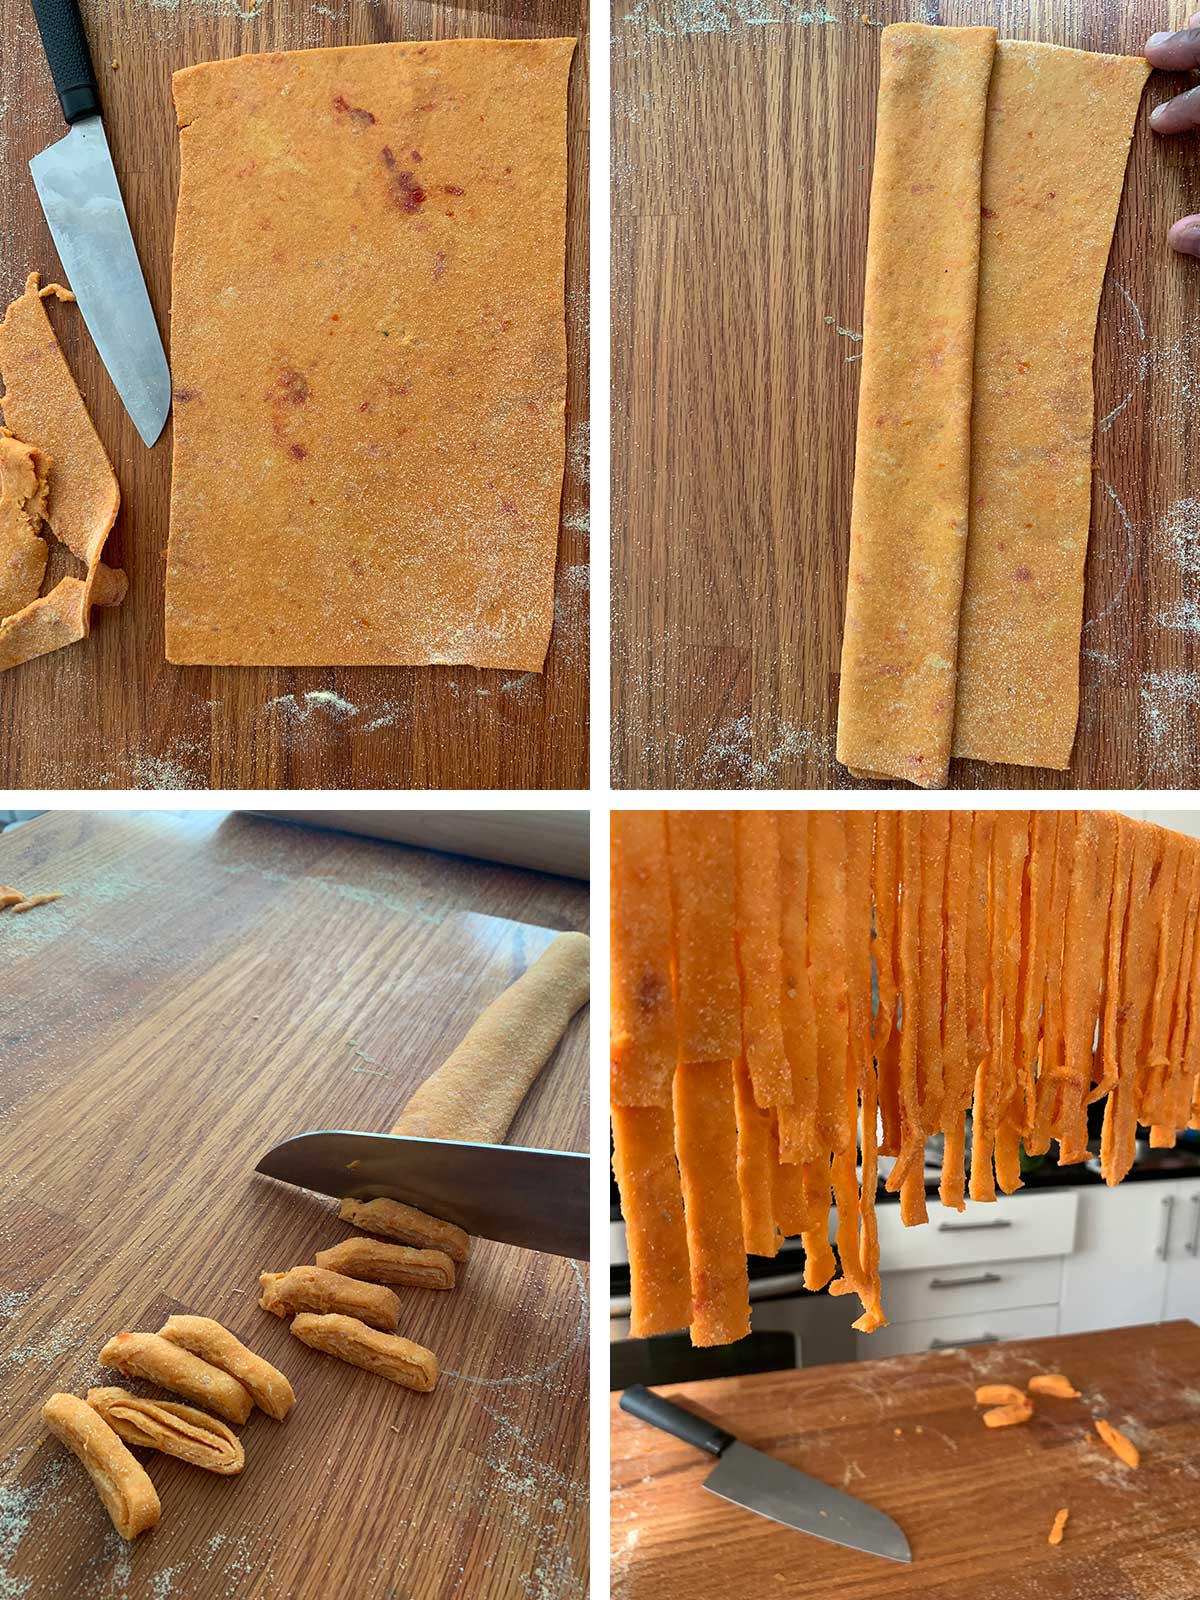 Collage showing pasta dough being cut